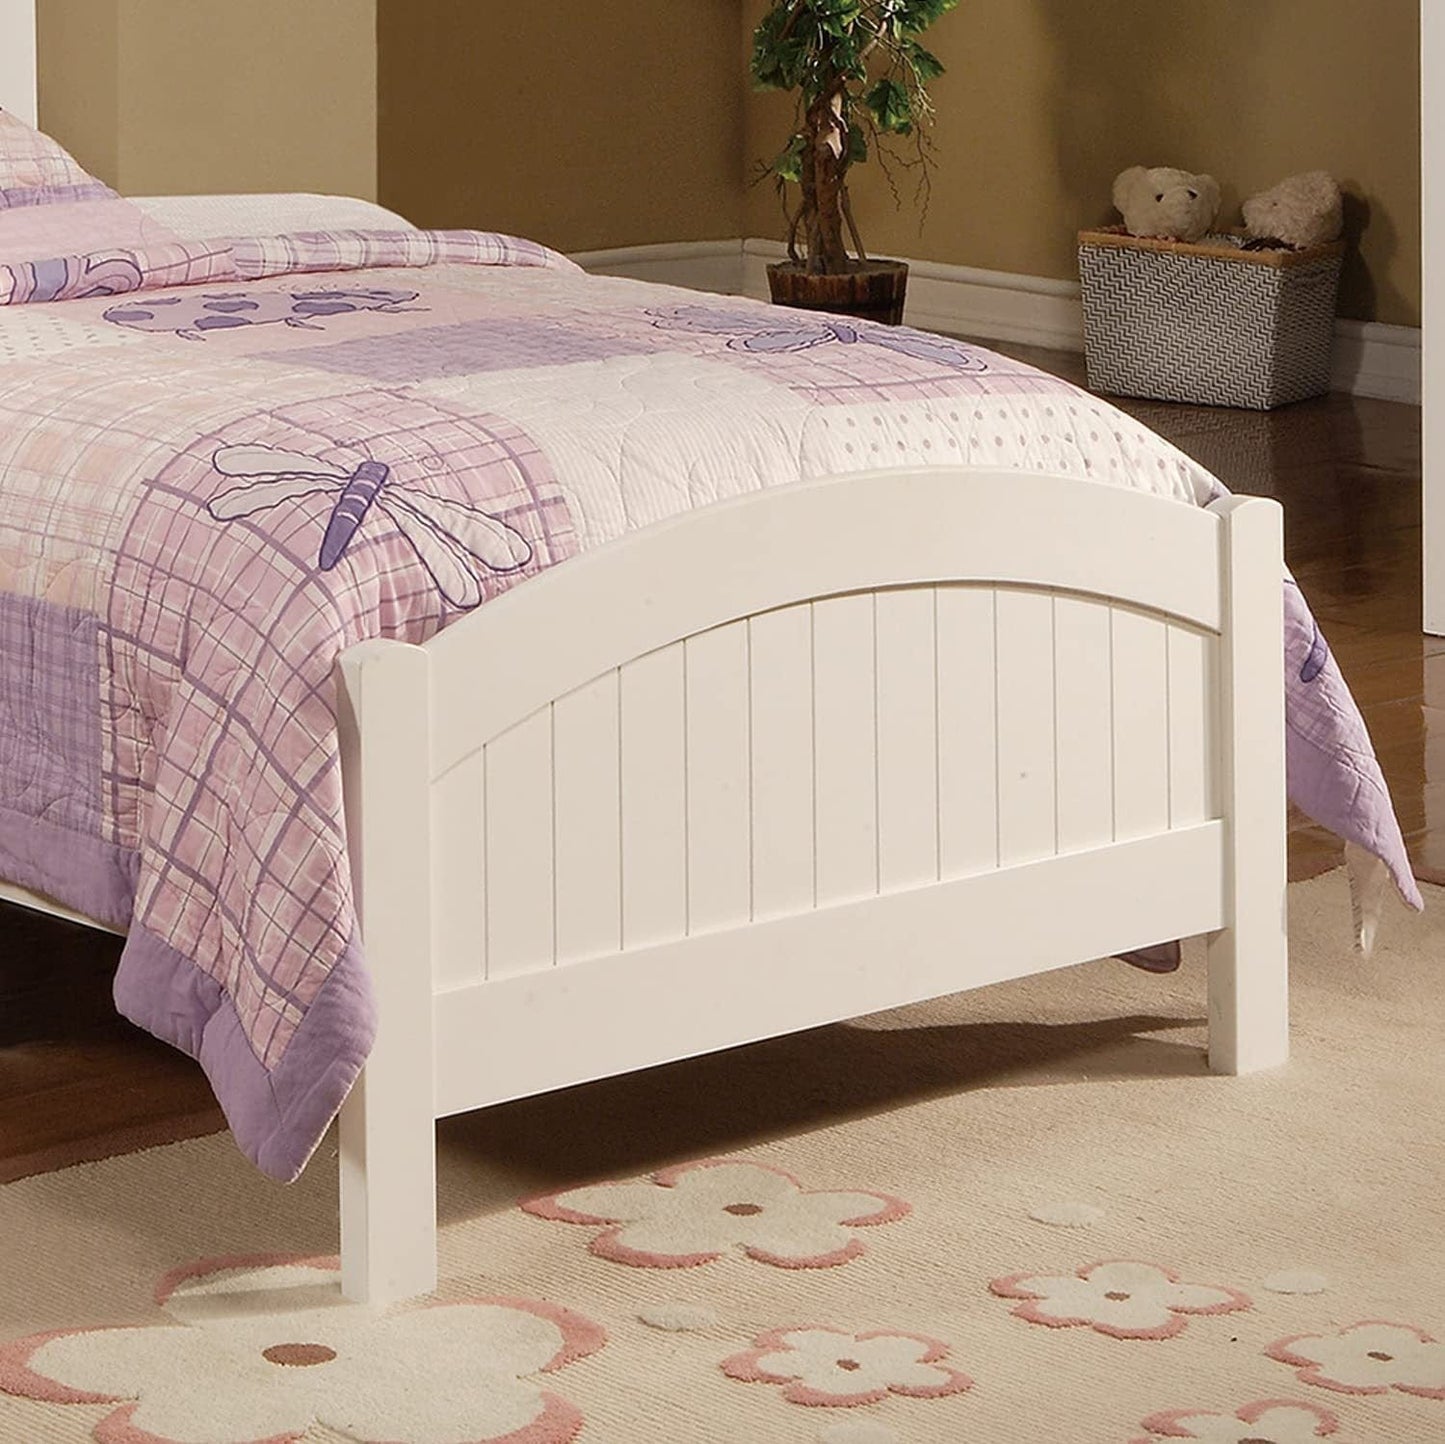 White Color Twin Size Bed Nightstand And Chest 3pc Set Bedroom Furniture Wooden Transitional Style Headboard